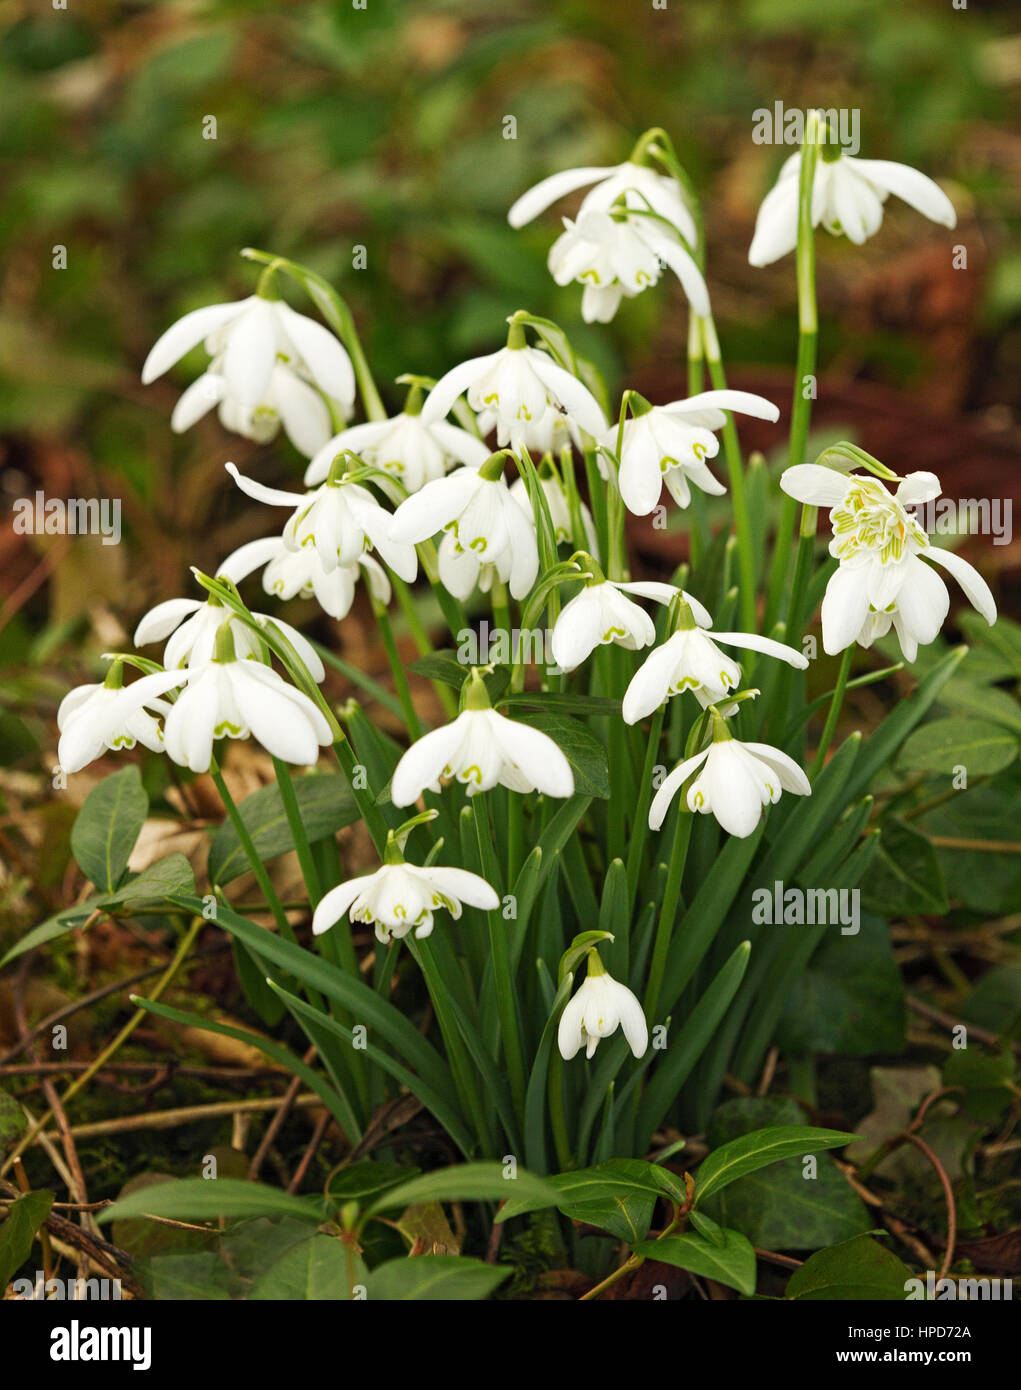 Group of double headed snowdrops growing in woodland Stock Photo